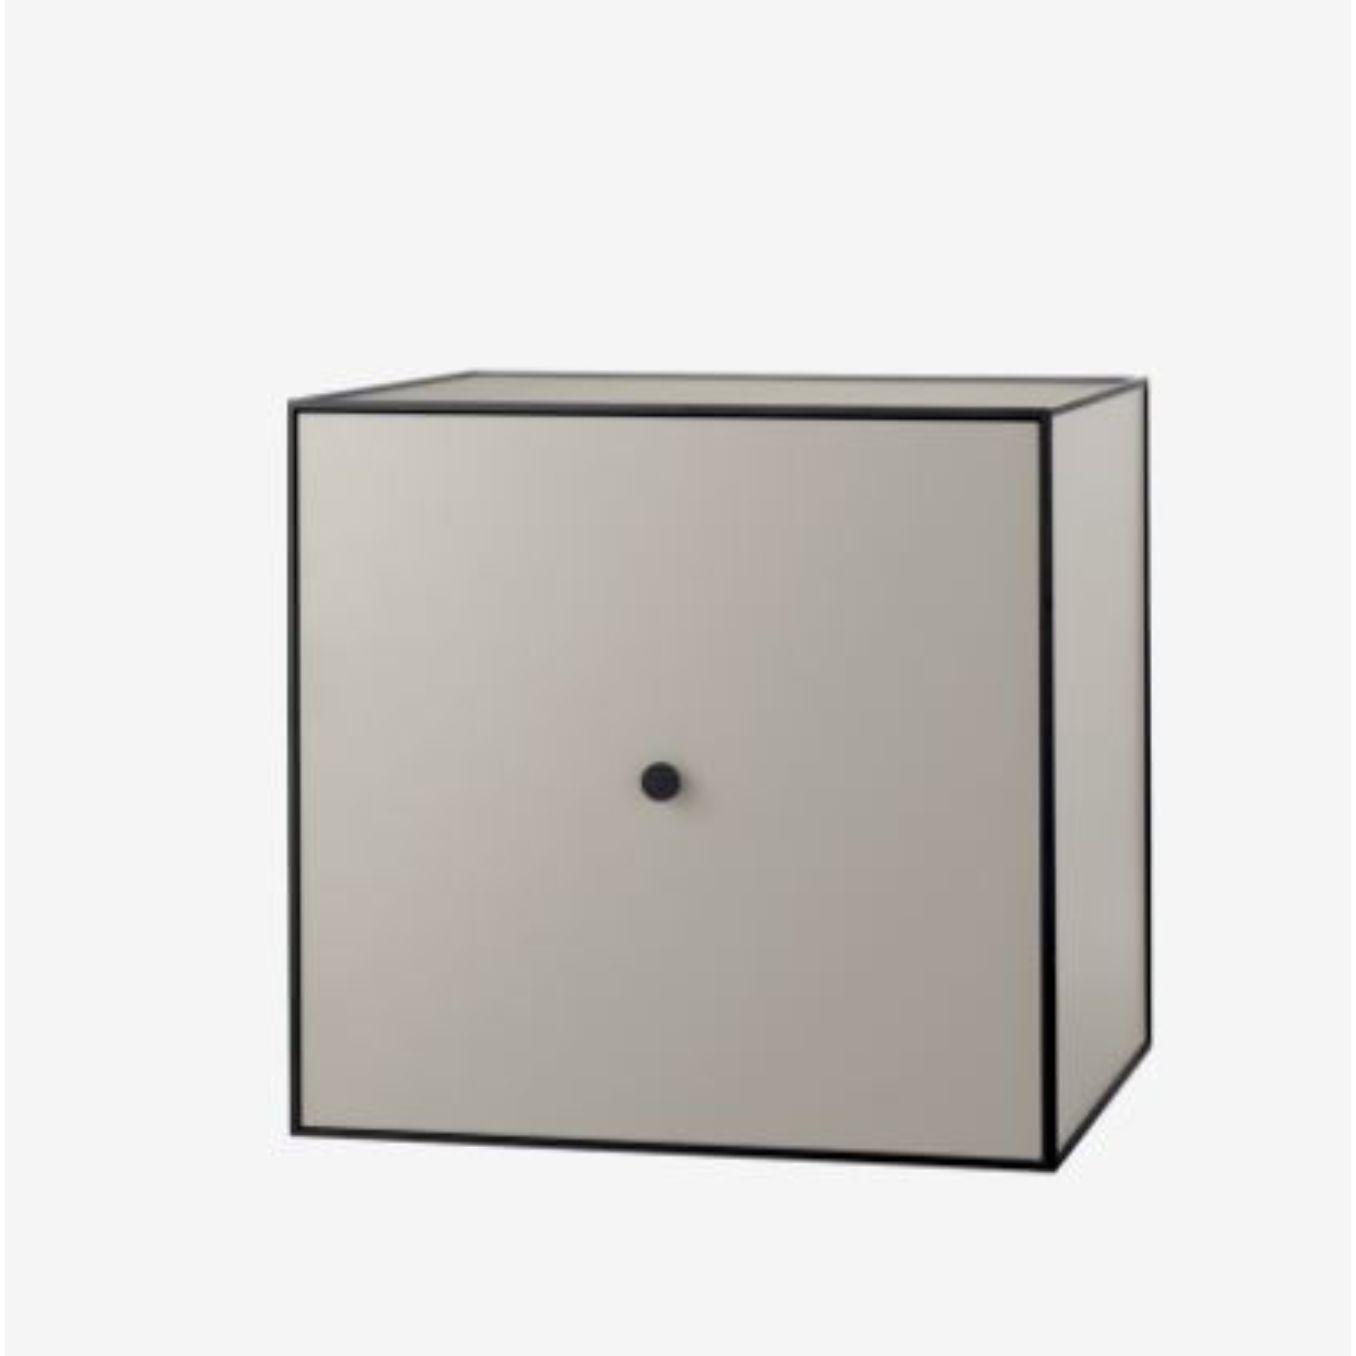 49 sand frame box with door / shelf by Lassen.
Dimensions: D 49 x W 42 x H 49 cm. 
Materials: Finér, Melamin, Melamin, Melamine, metal, Veneer, ash.
Also available in different colours and dimensions.
Weight: 17 Kg.


By Lassen is a Danish